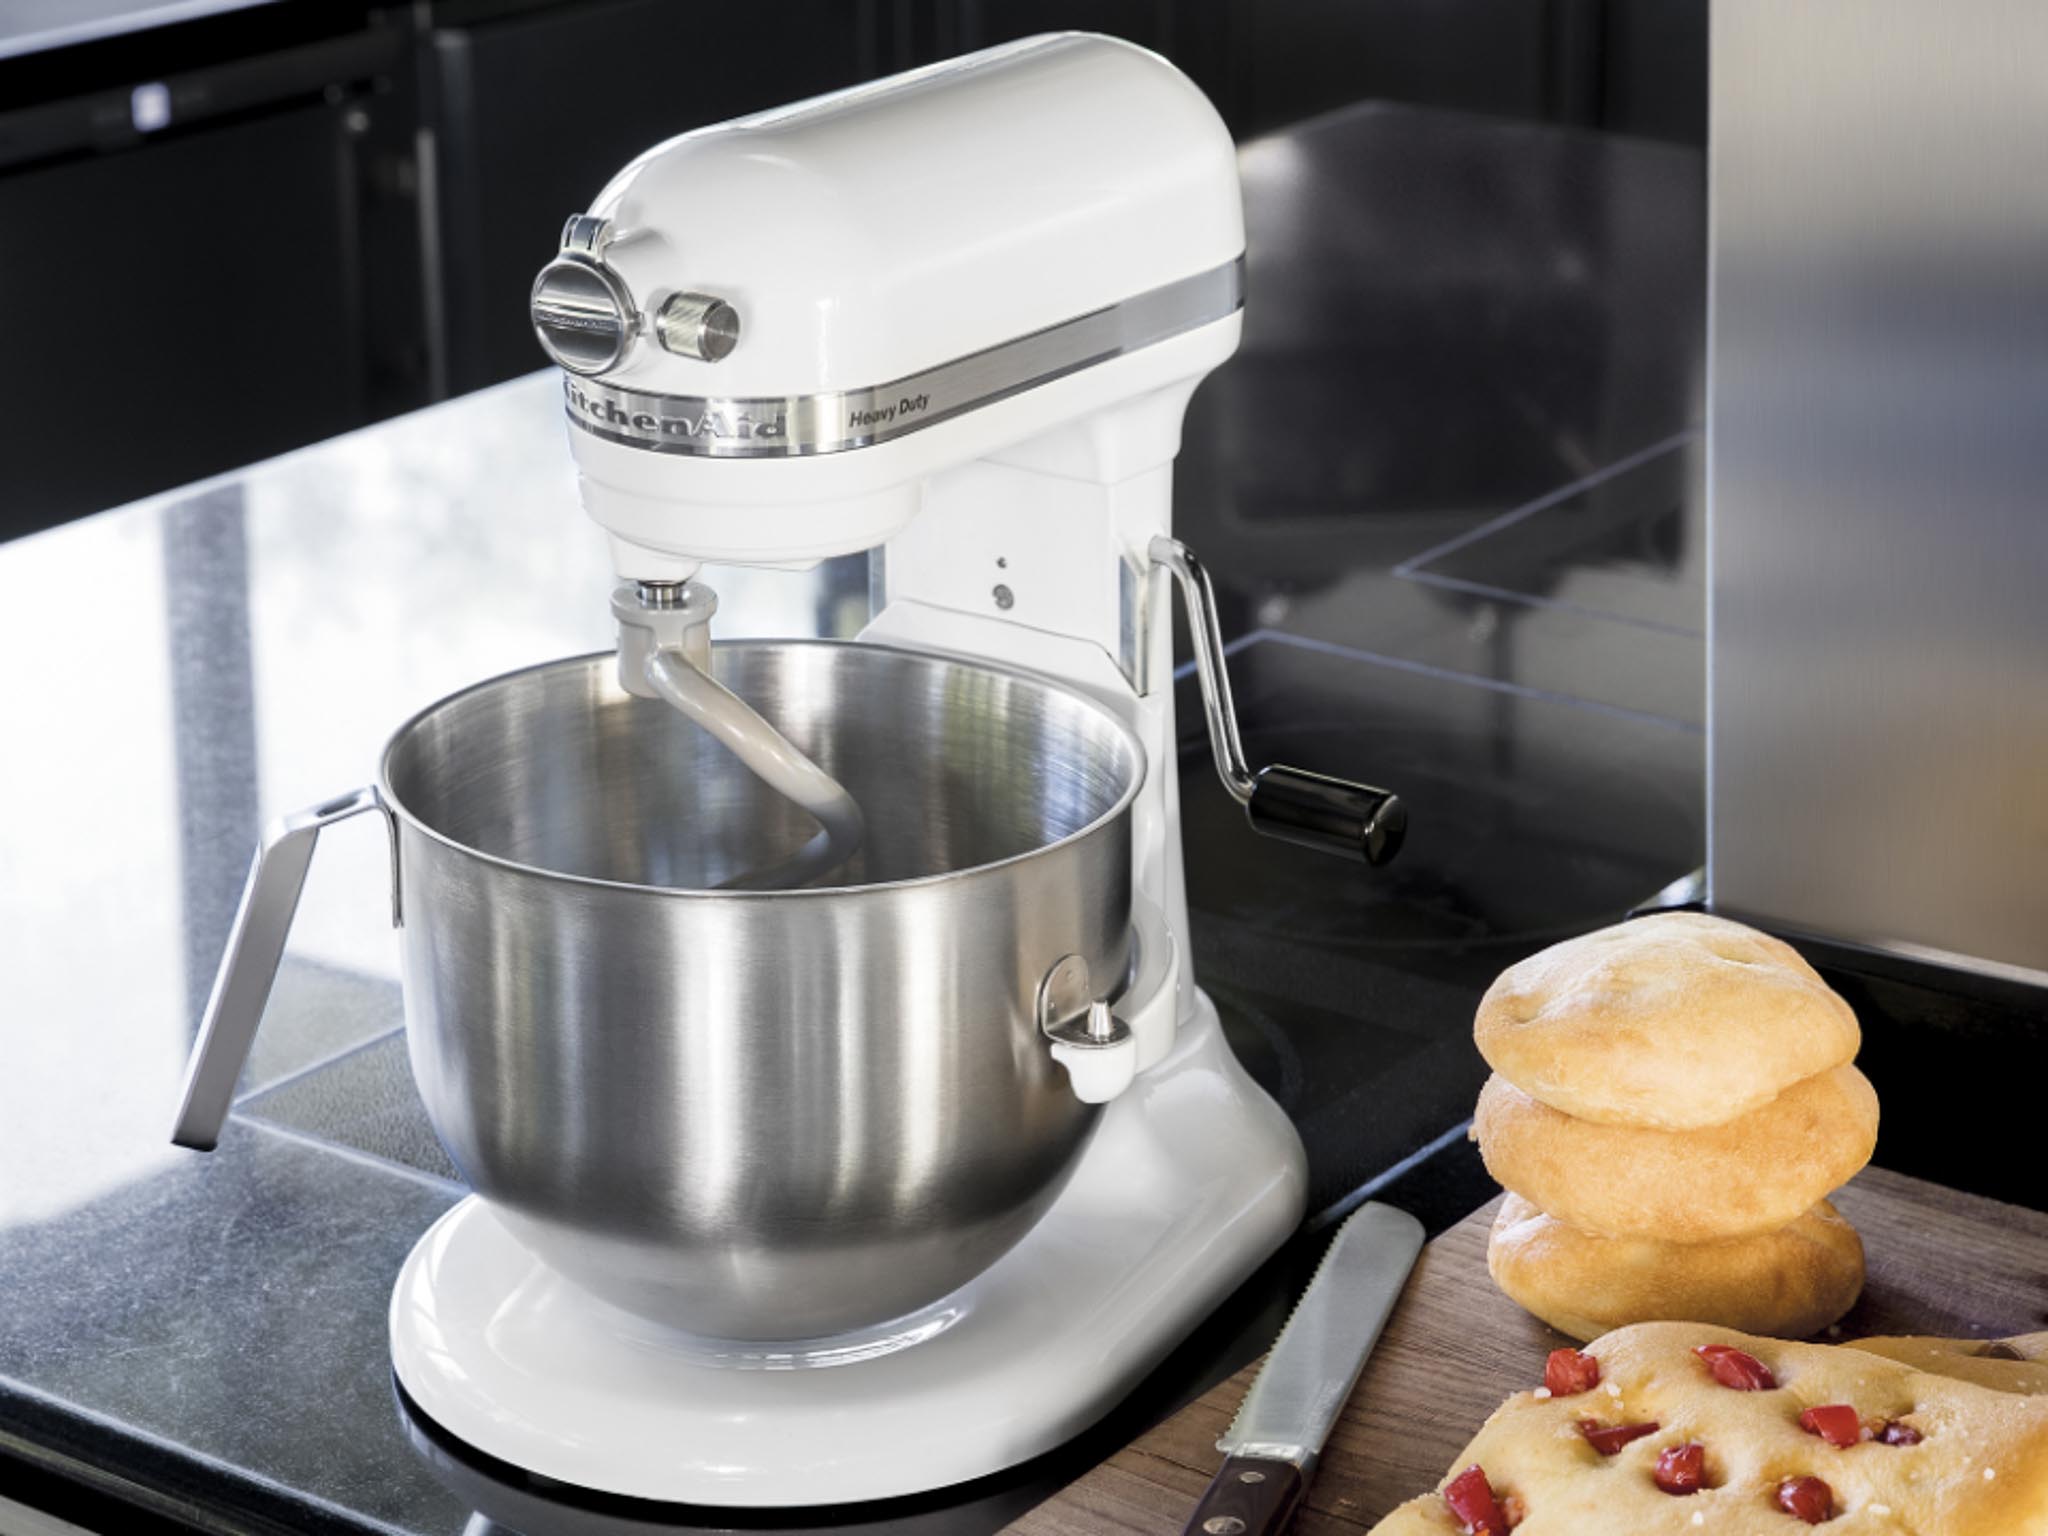 Stainless-Steel-Bowl Mixer With Pastry